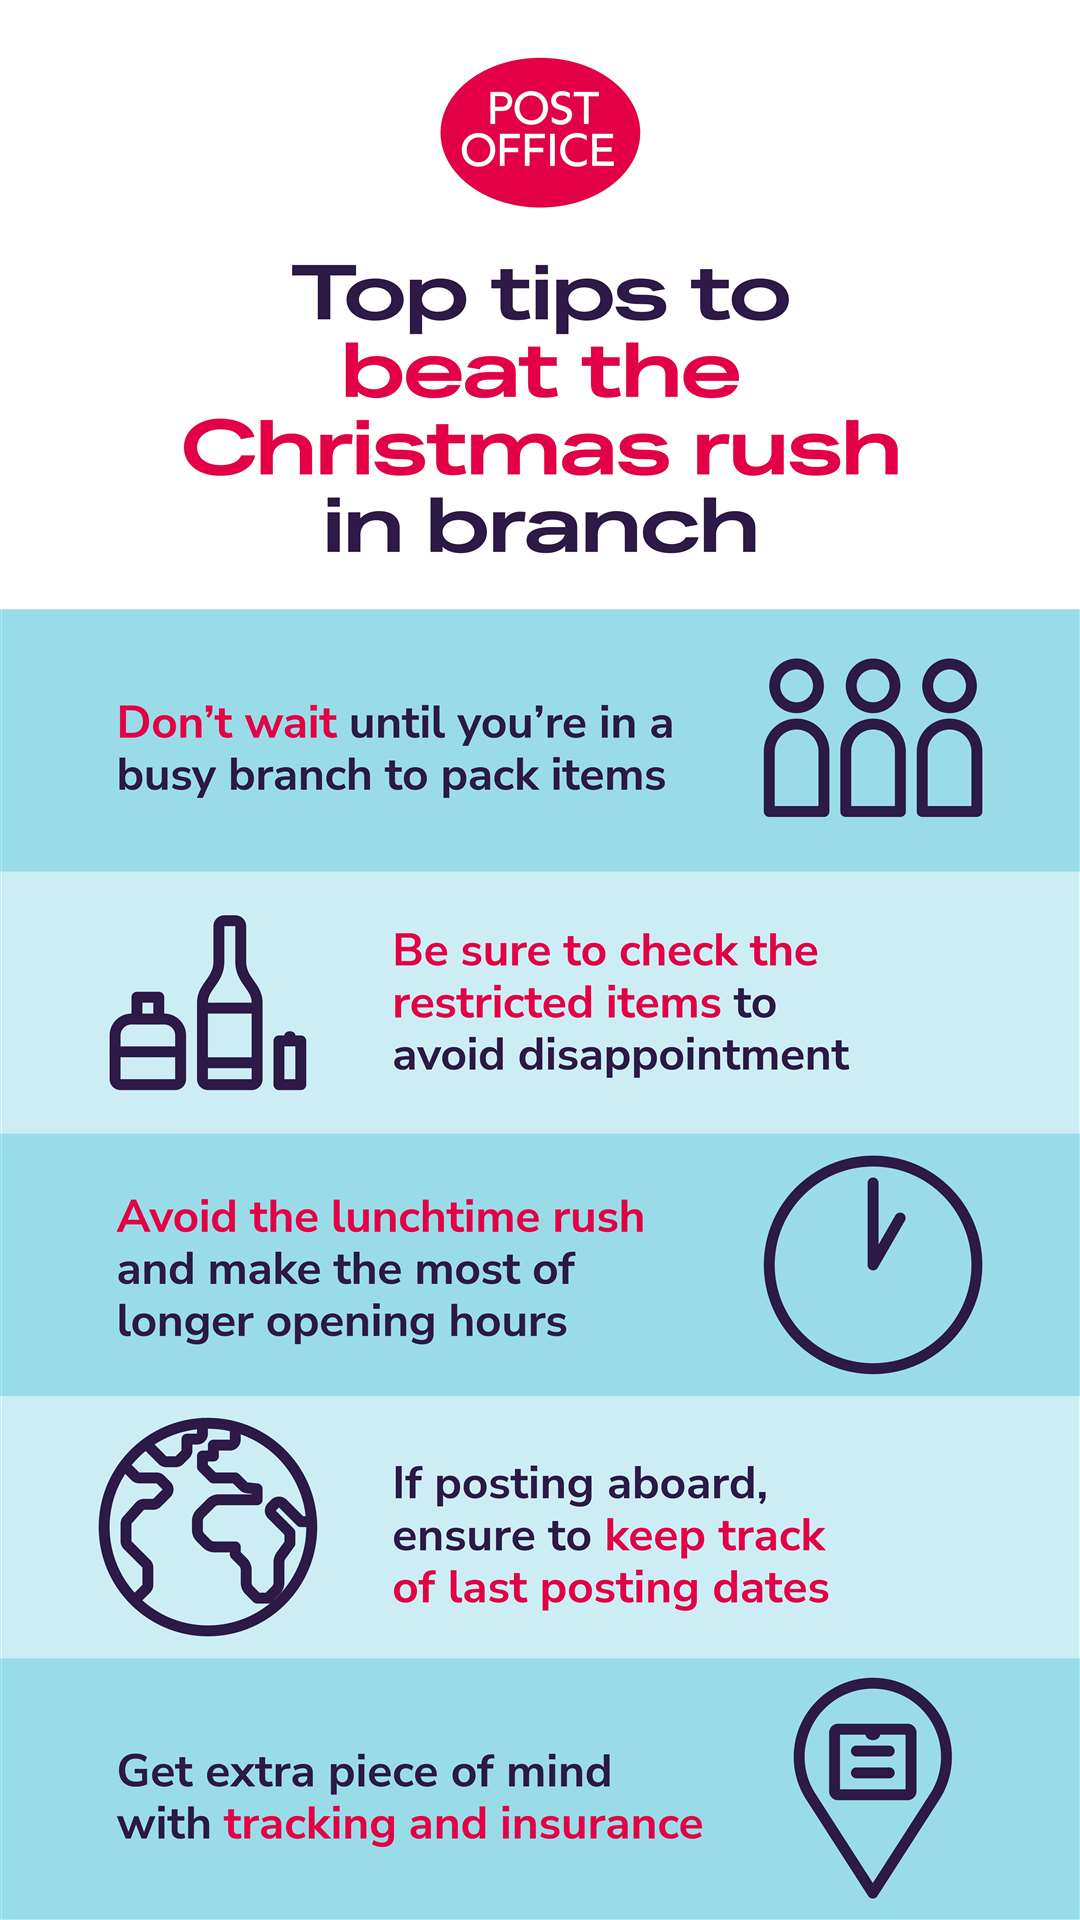 Top tips from Post Office as it predicts peak posting day ahead of Christmas